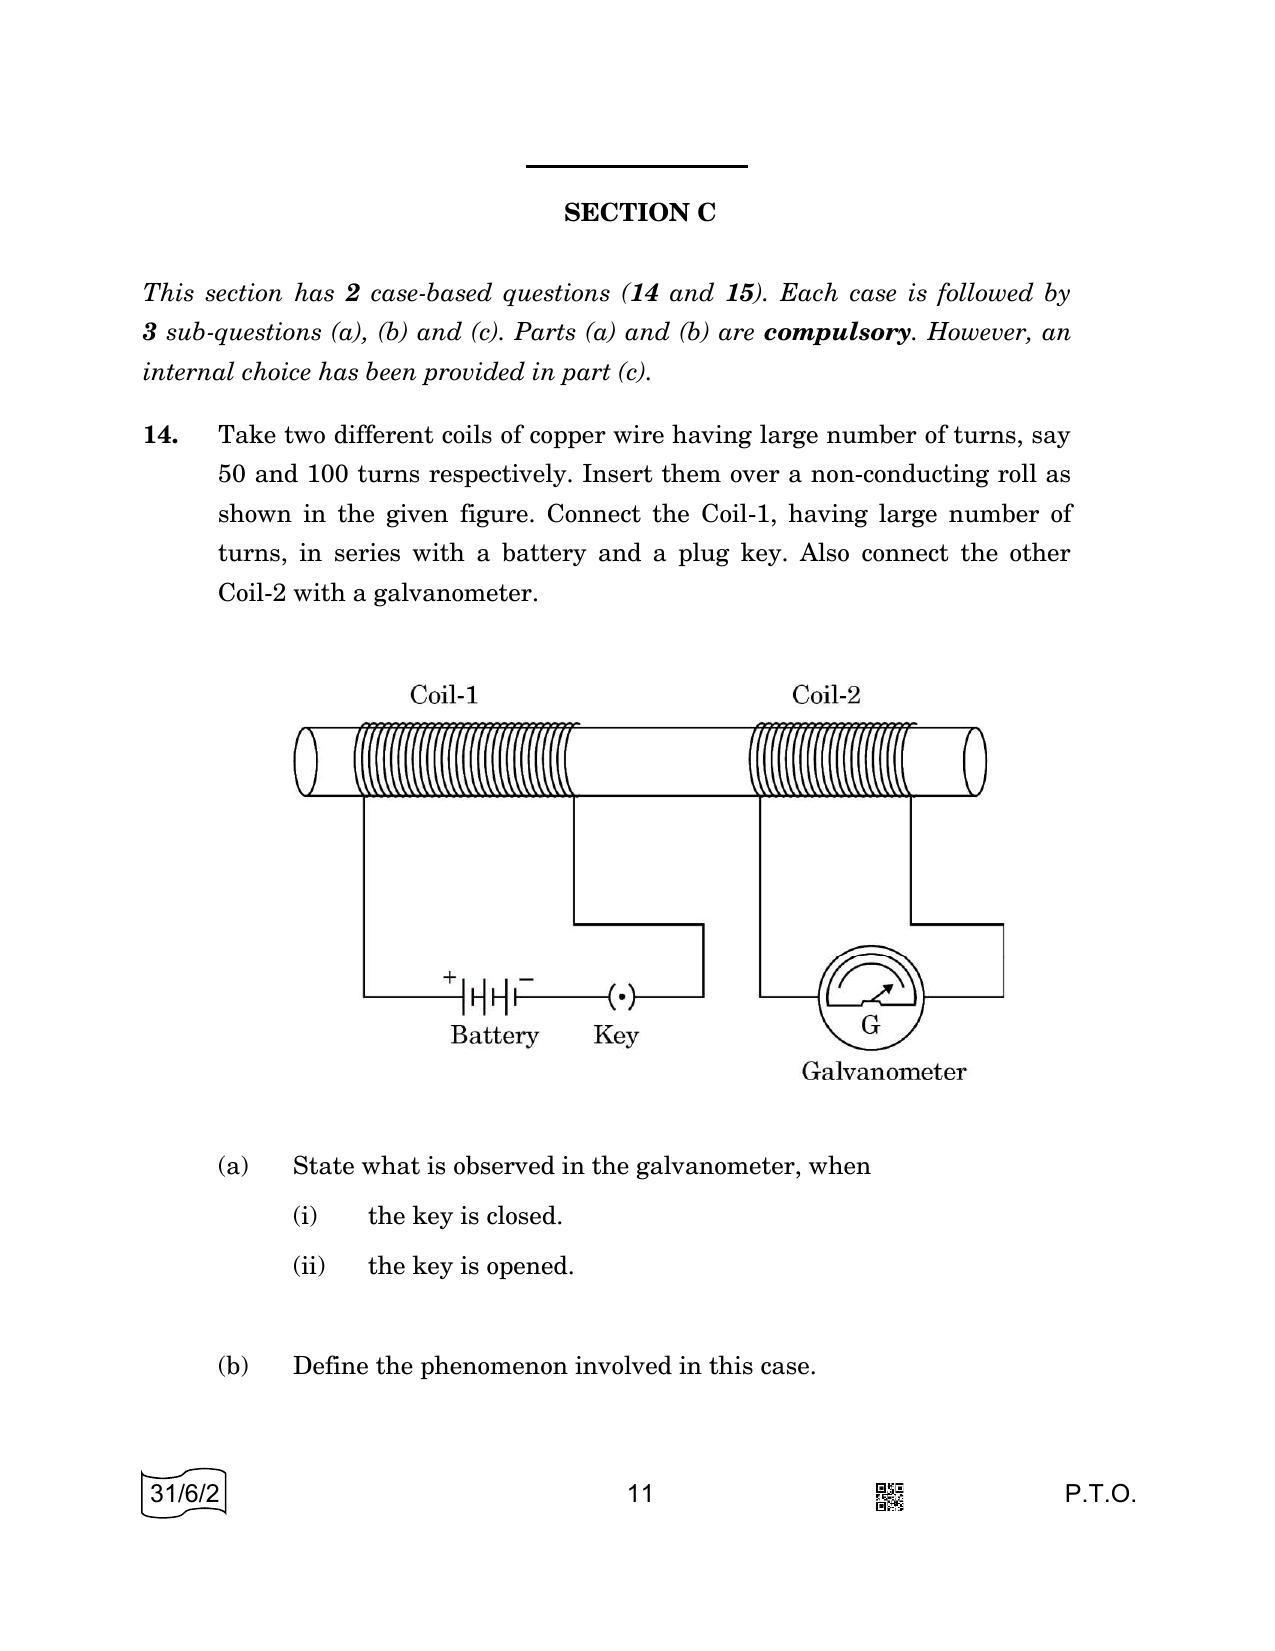 CBSE Class 10 31-6-2 SCIENCE 2022 Compartment Question Paper - Page 11